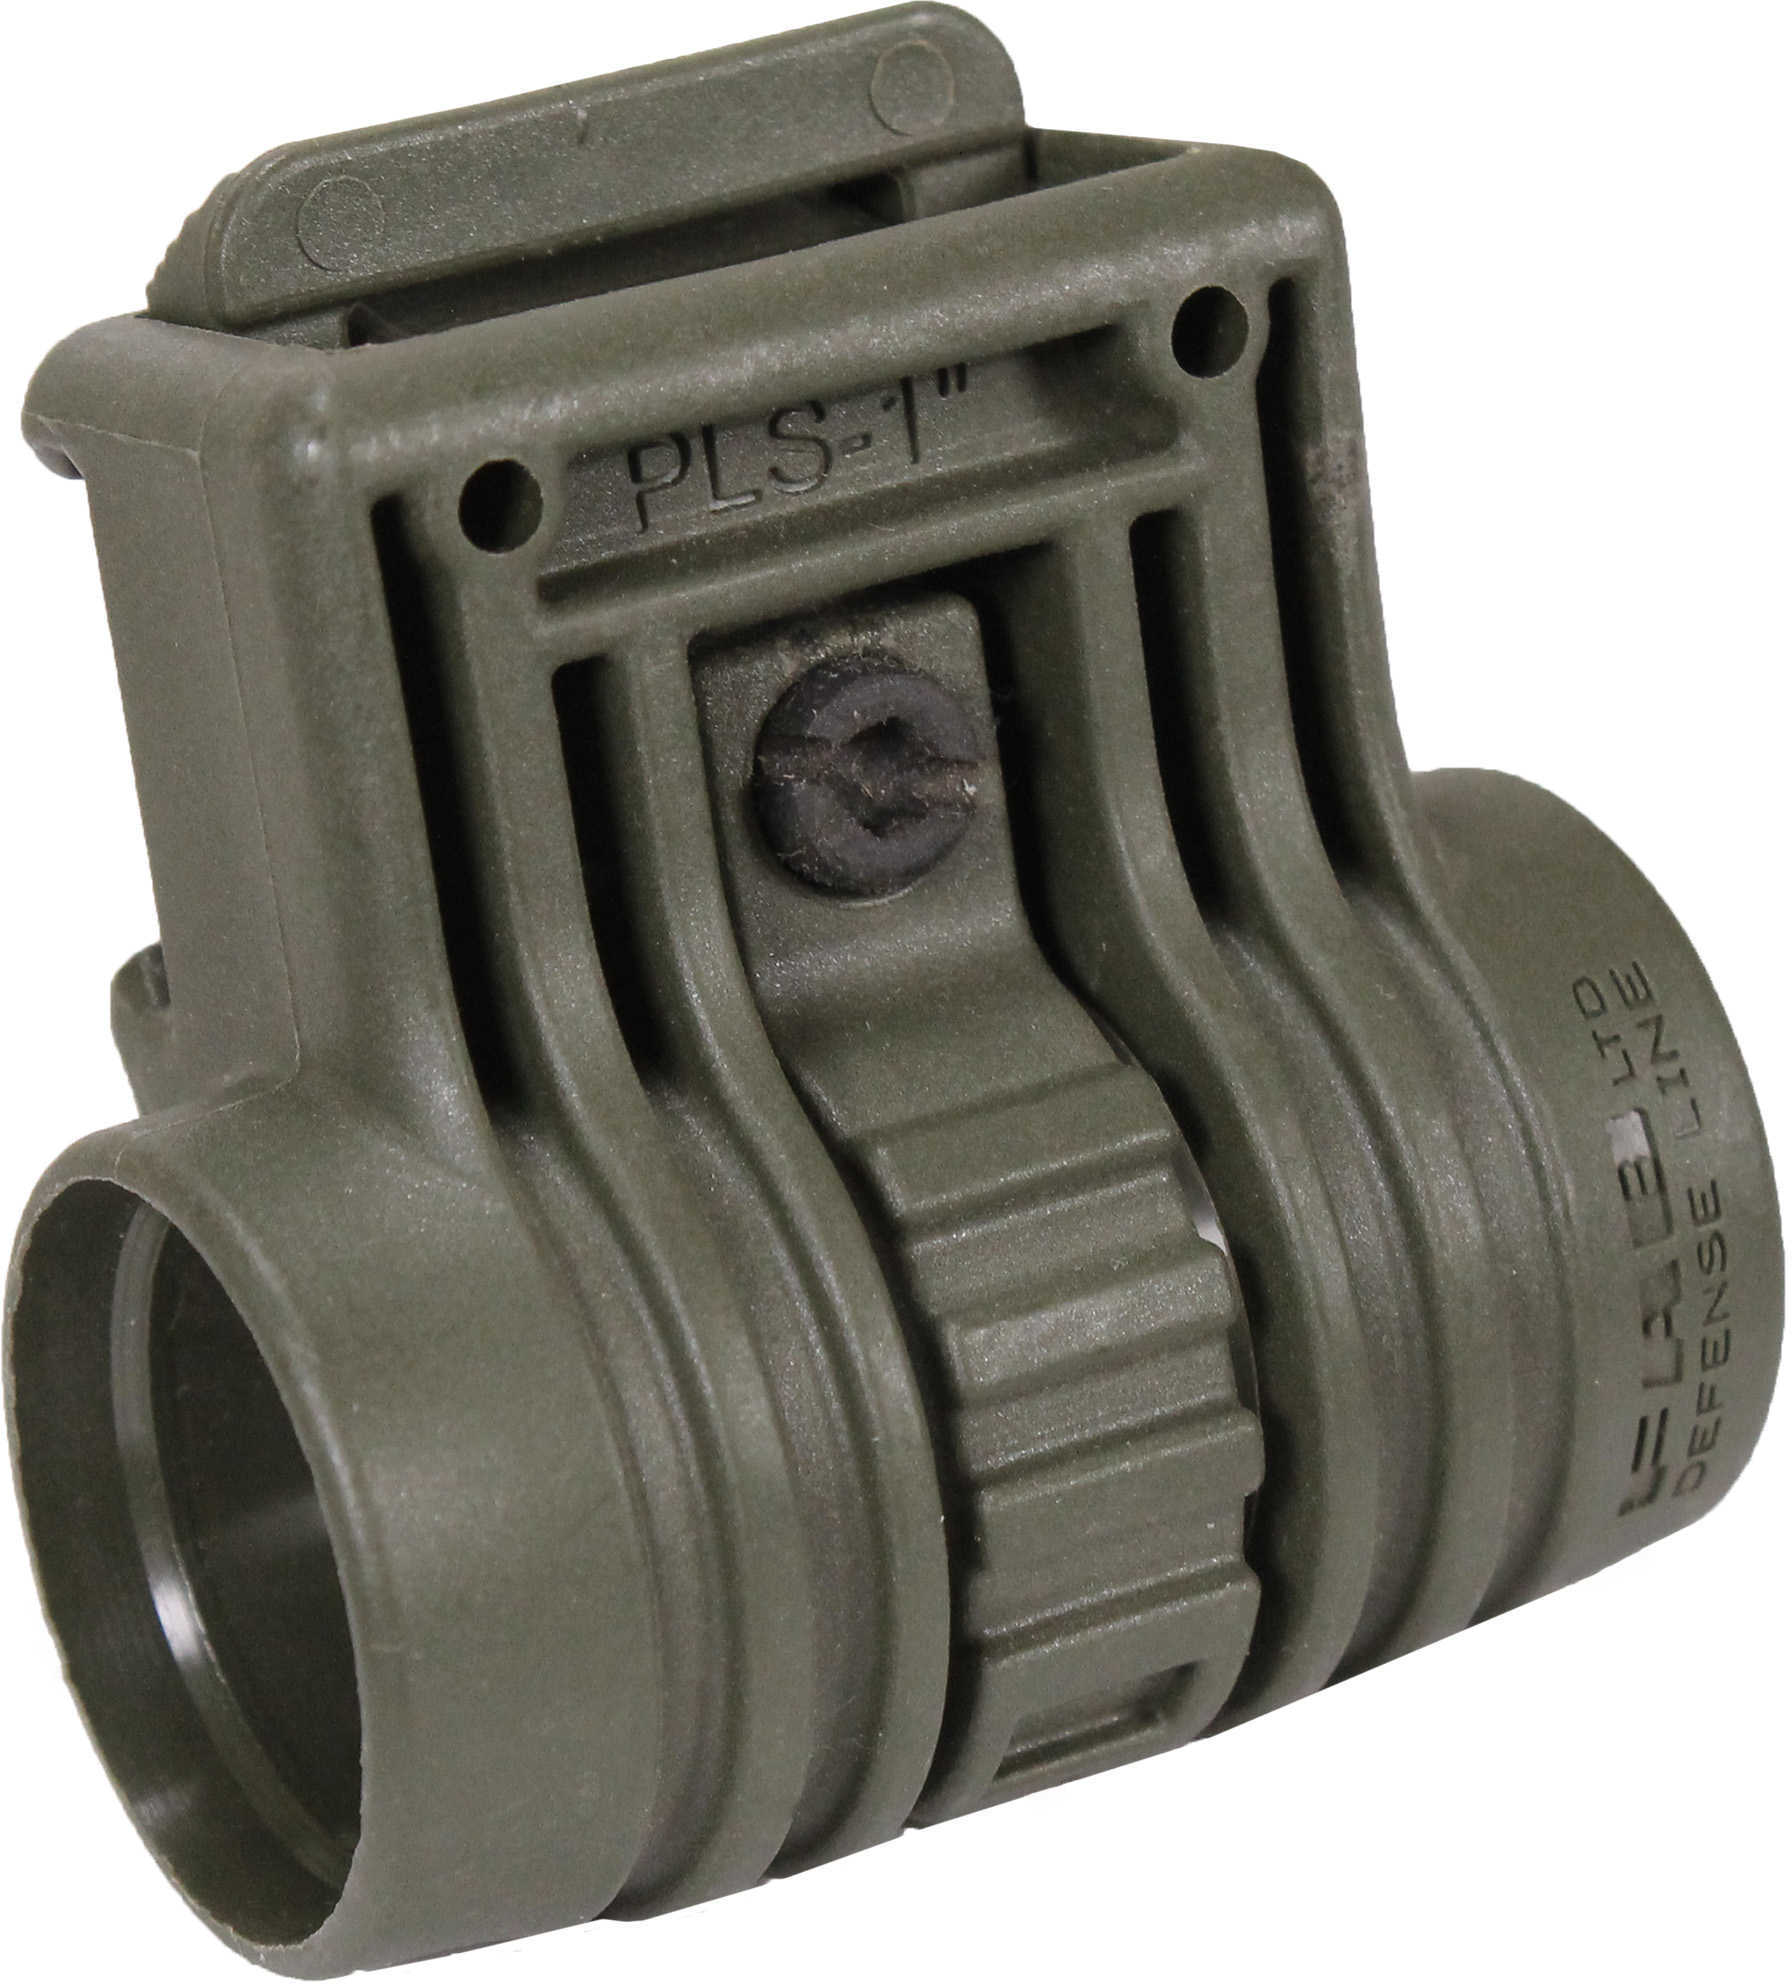 FAB Defense 1-Inch Tactical Light Side Mount OD Green